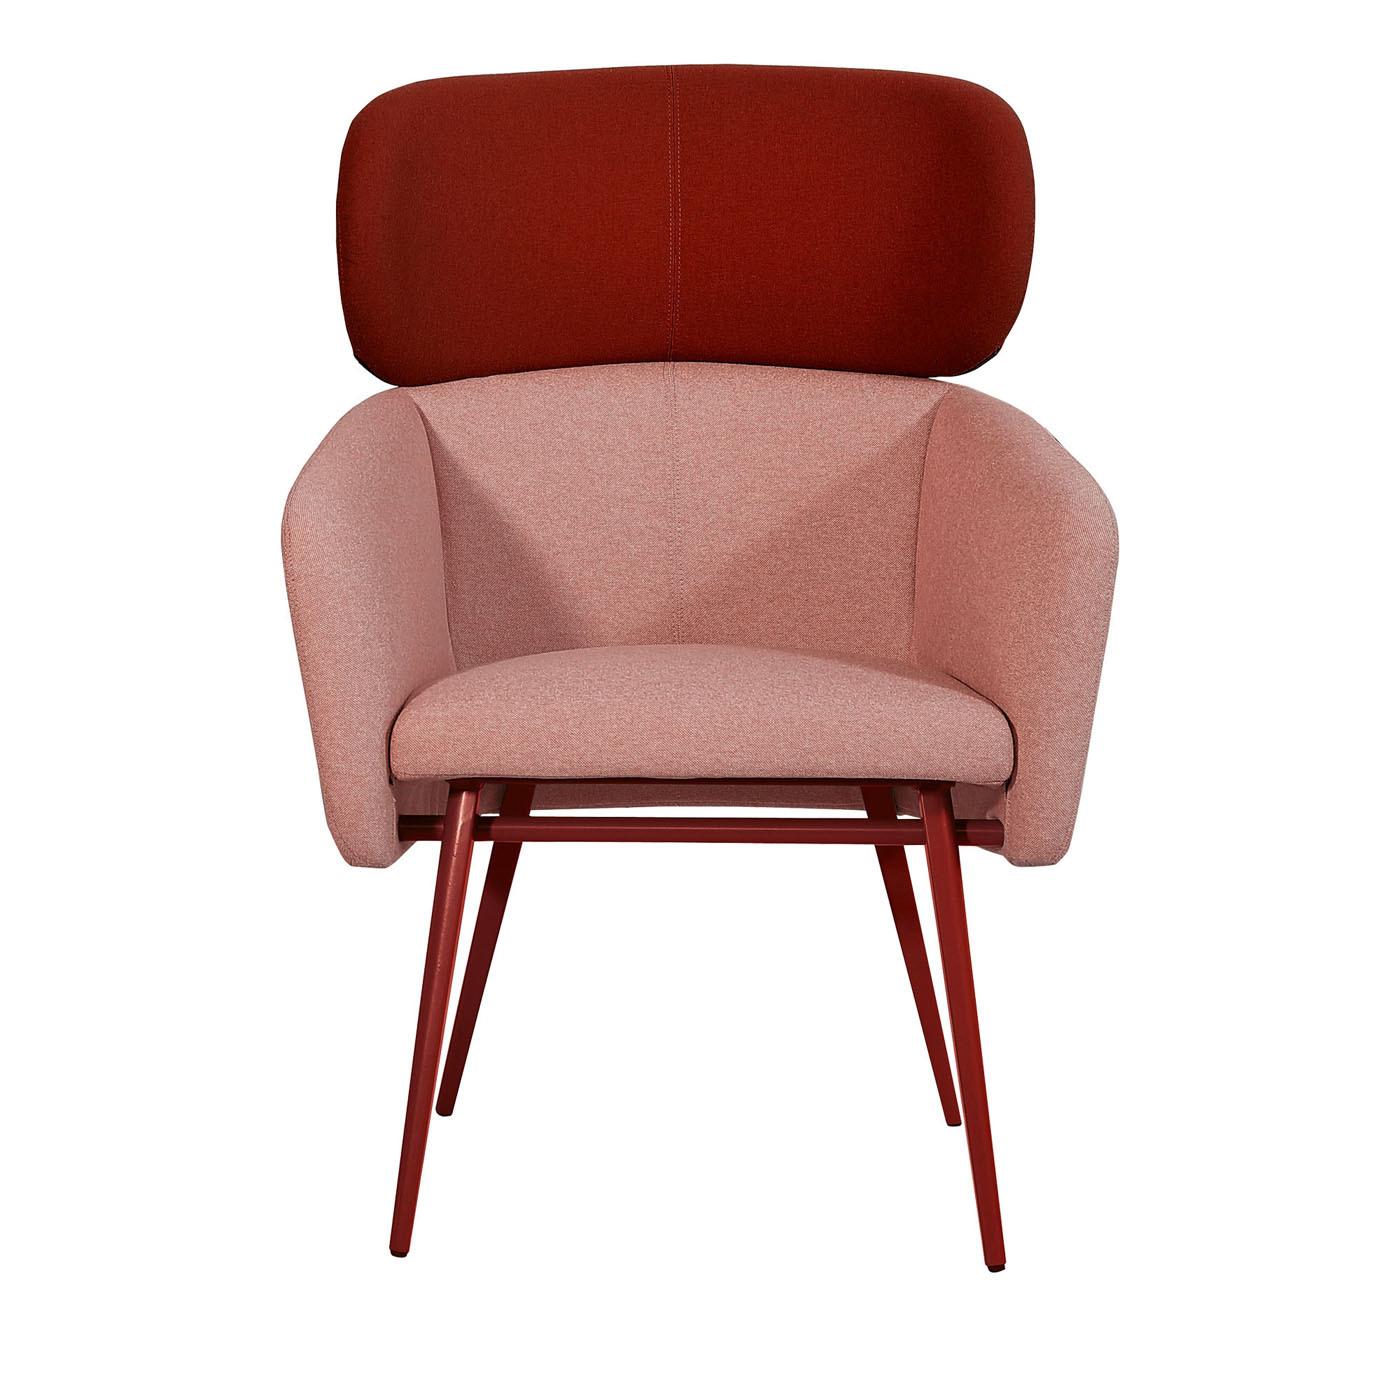 Italian Balù Extra Large Met Pink and Burgundy Armchair by Emilio Nanni For Sale